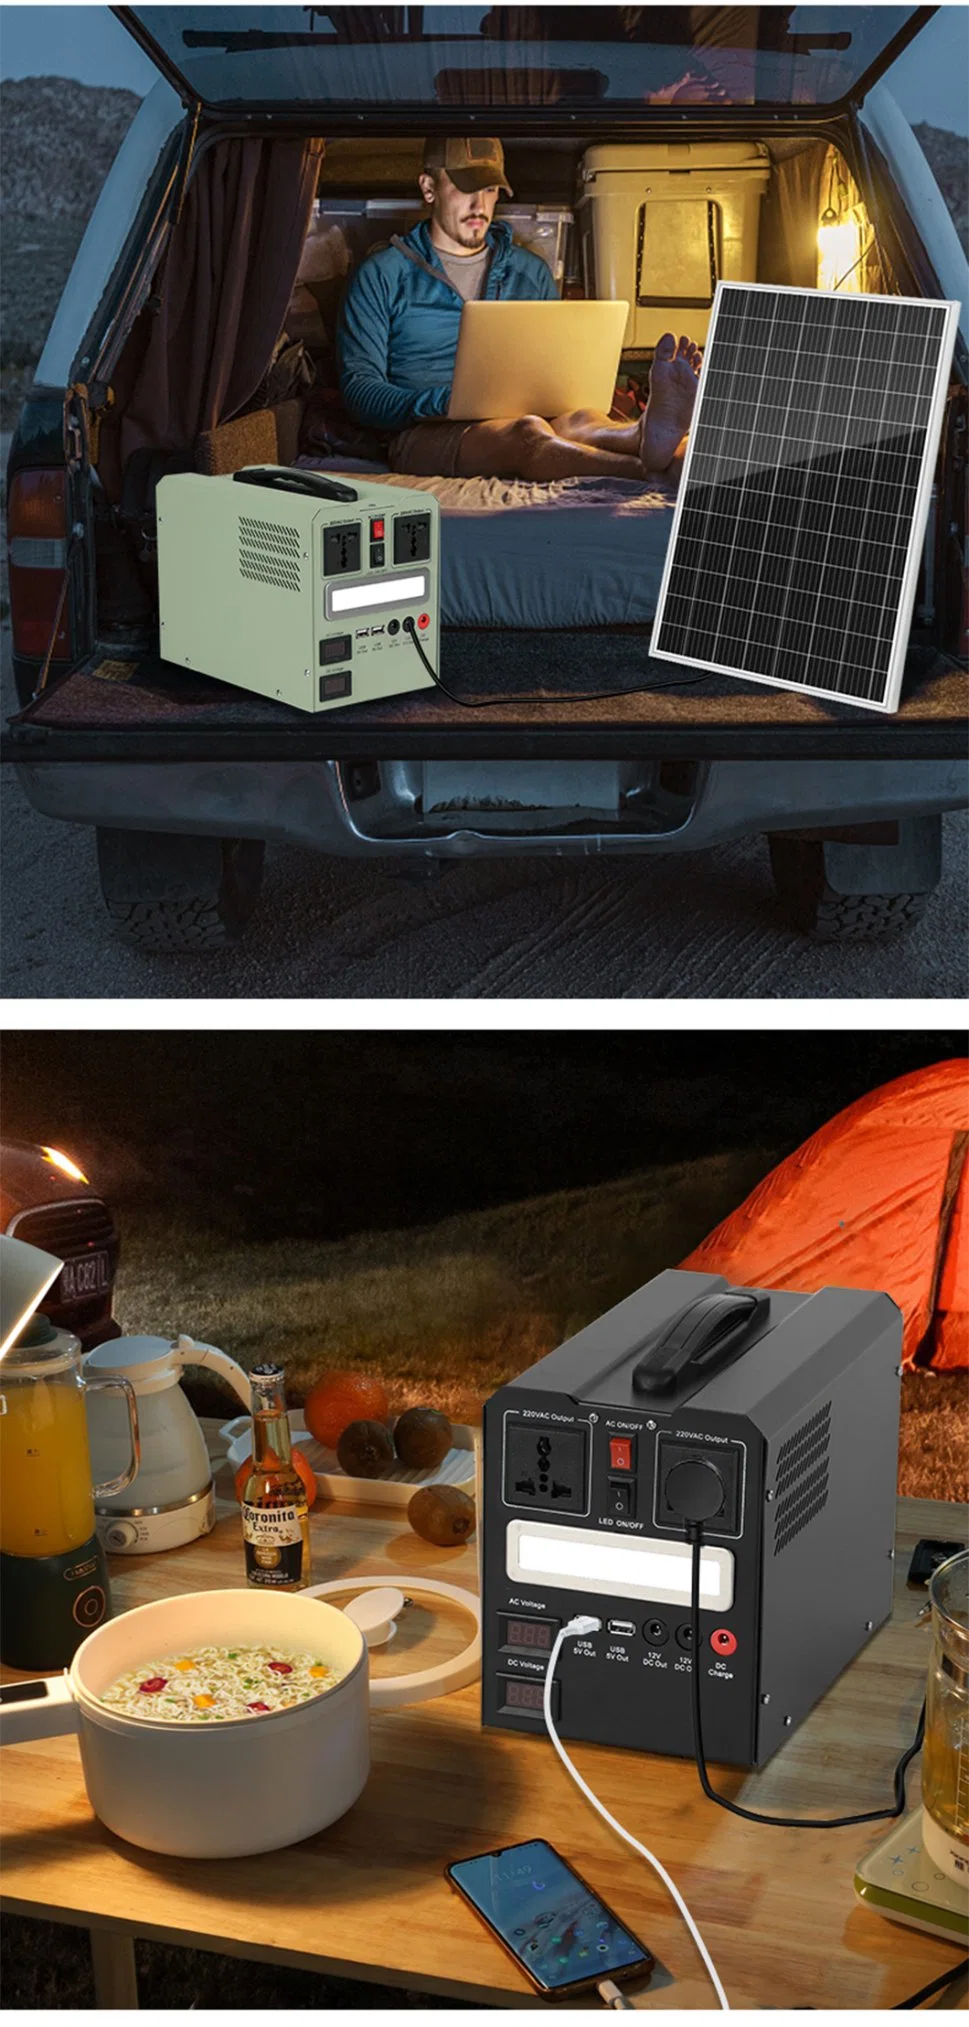 Home Outdoor Mobile LiFePO4 Lithium Battery Output 500W 1000W Portable Energy Storage Supply Station Solar Generator for Camping ODM OEM Manufacturer